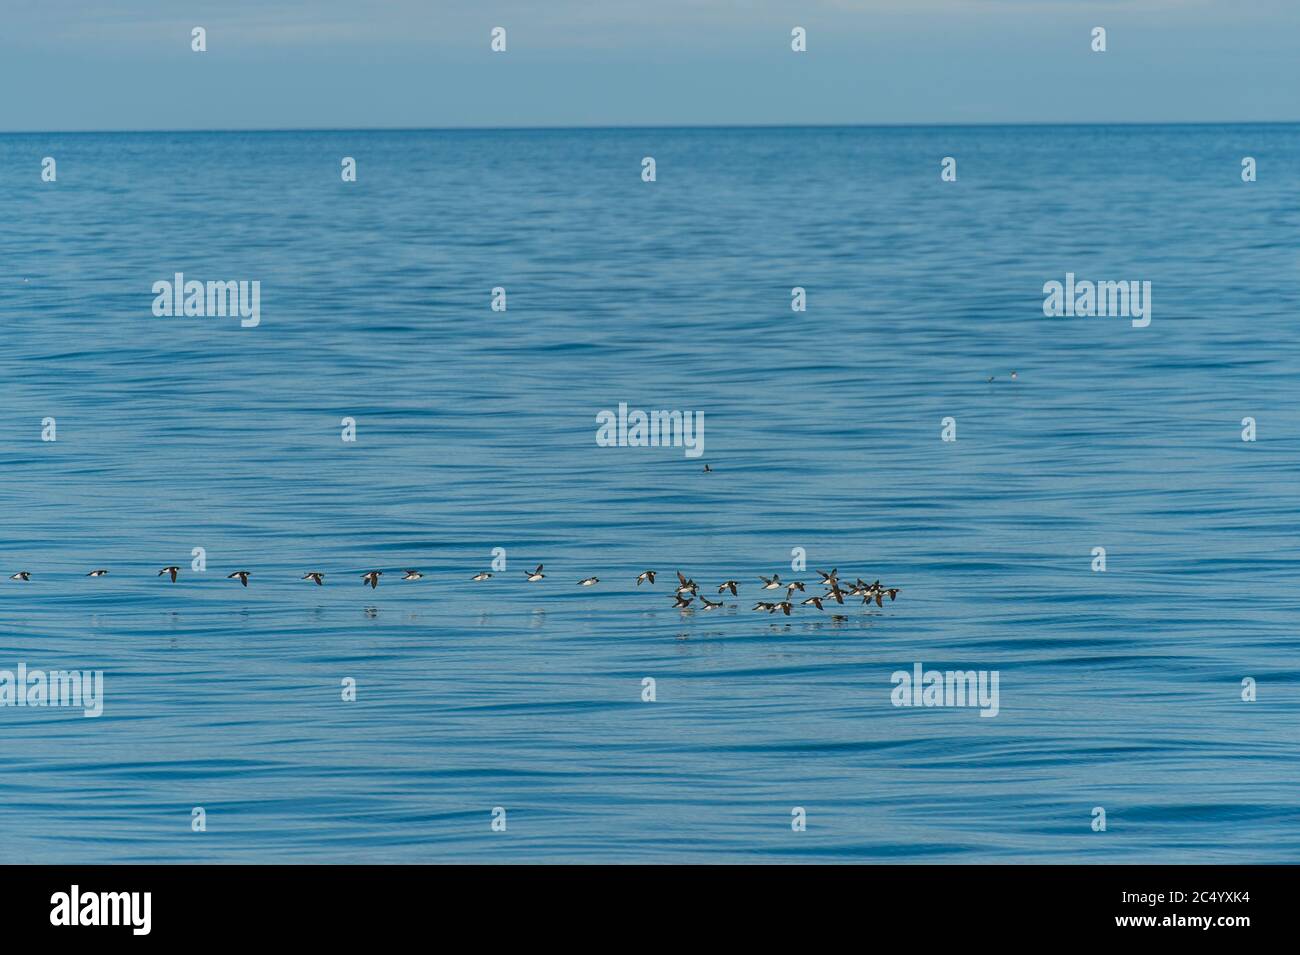 Flocks of Thick-billed murres or Brunnich's guillemot (Uria lomvia) flying over the Arctic Ocean near Bellsund, which is a 20 km long sound on the wes Stock Photo